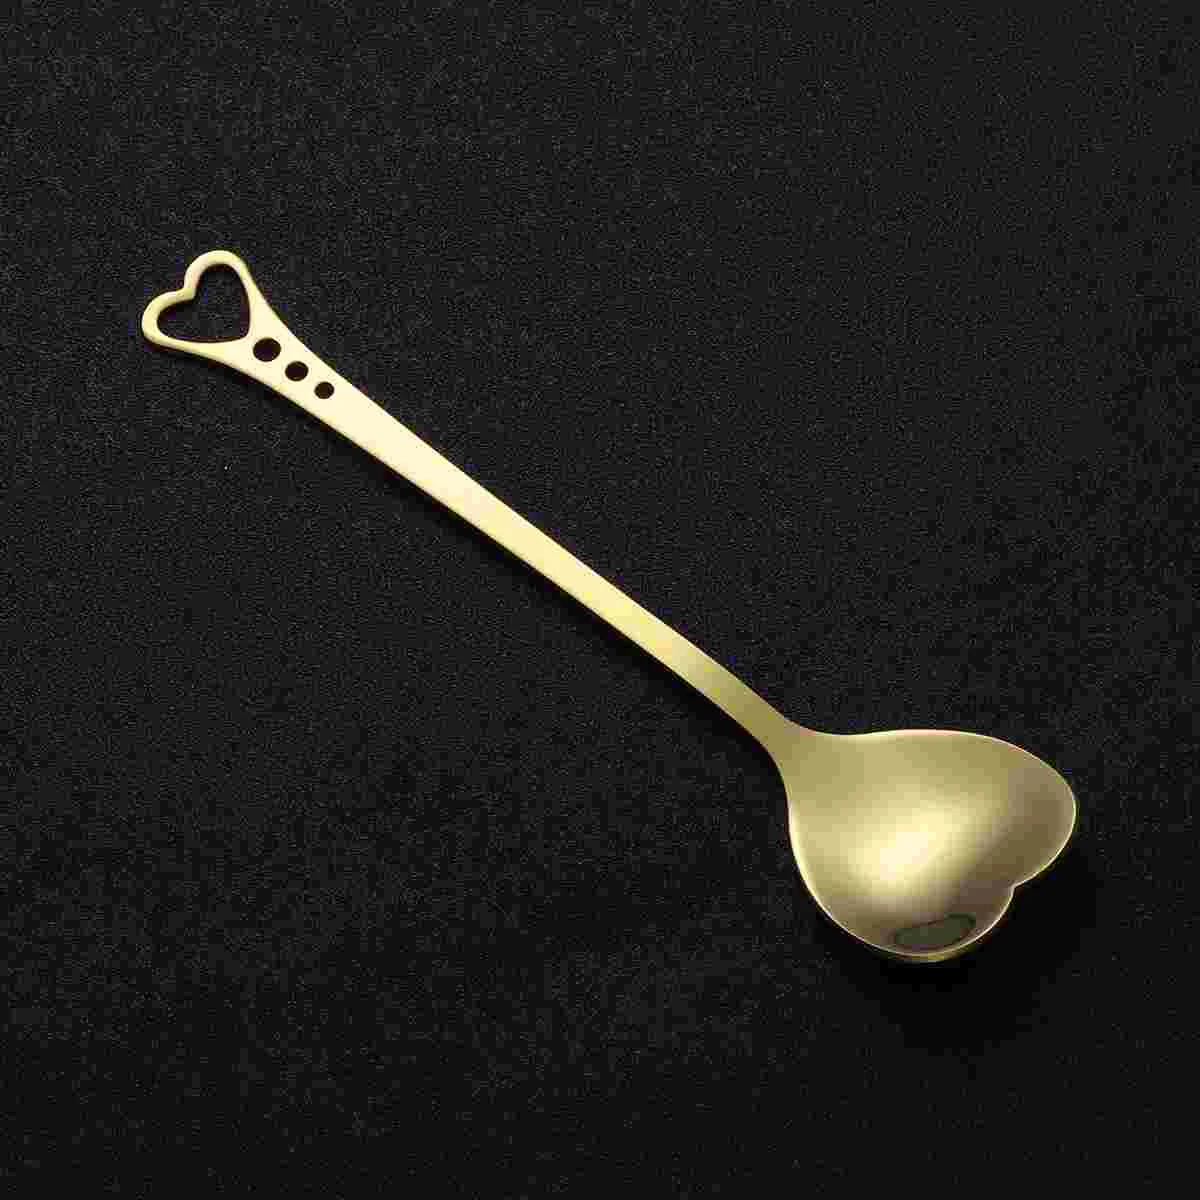 

1Pc Stainless Steel Heart Spoon Dessert Spoons for Home Kitchen Coffee Sugar Tea Cake Stirring Mixing Appetizers Silverware (